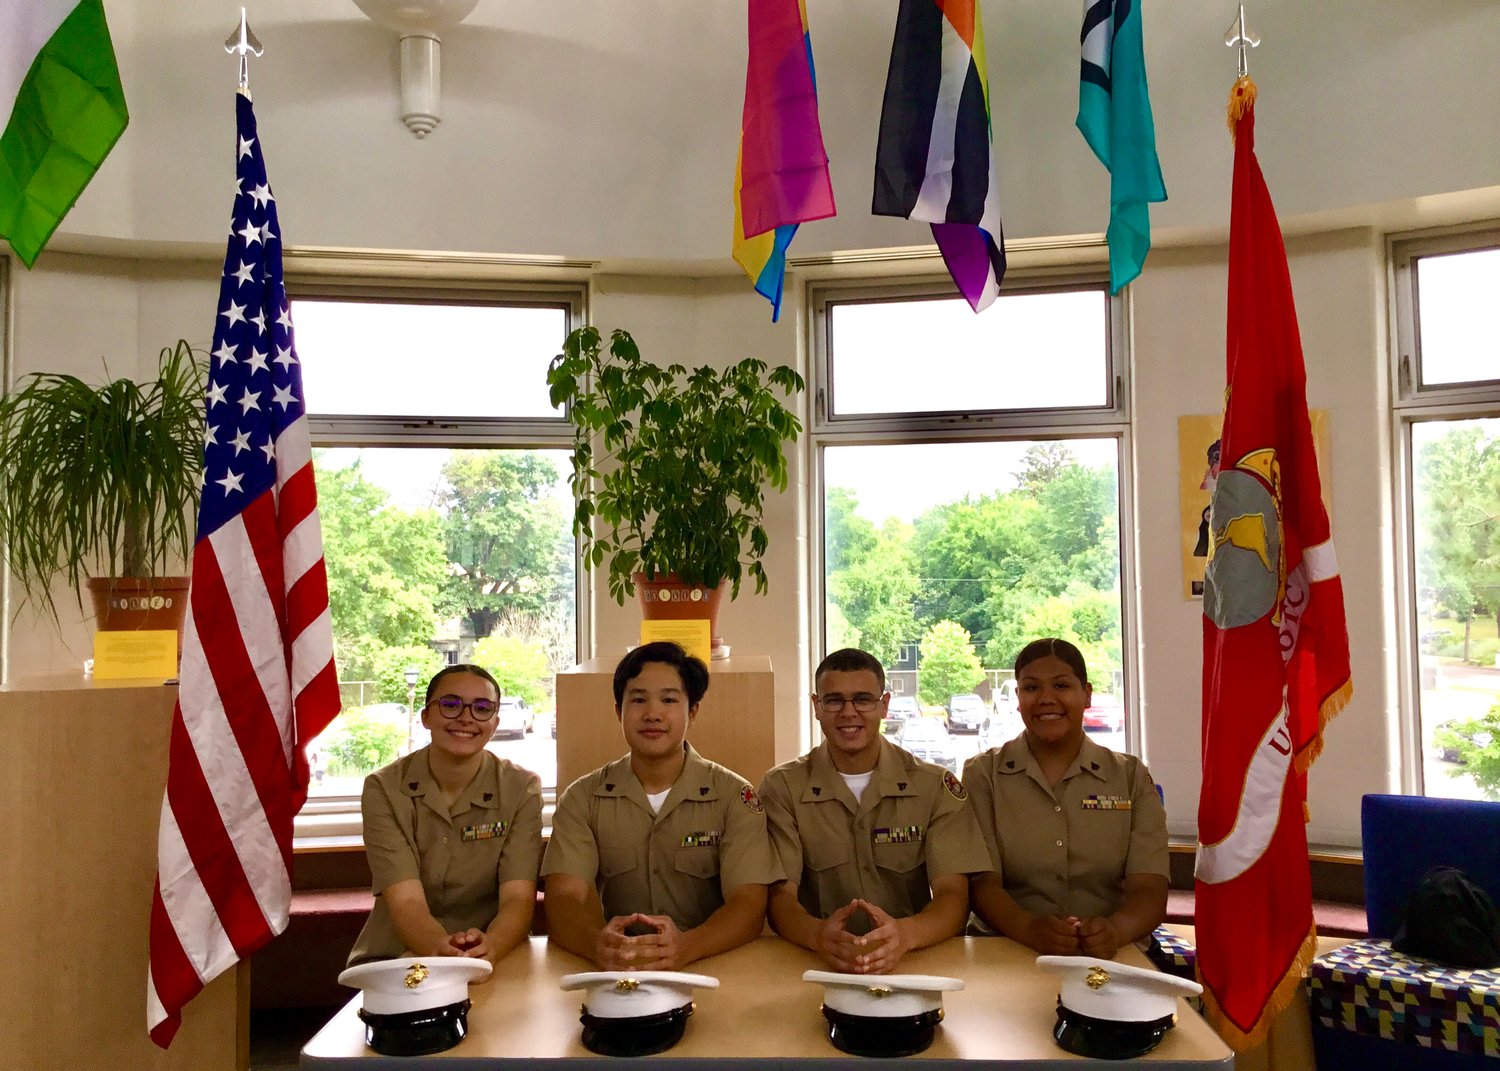 Sophia Moore, Alex Le, Jesiah Mason, and Kimberly Sanchez-Mendez (left to righ) qualified for the JROTC Leadership & Academic Bowl Championship in Washington D.C.